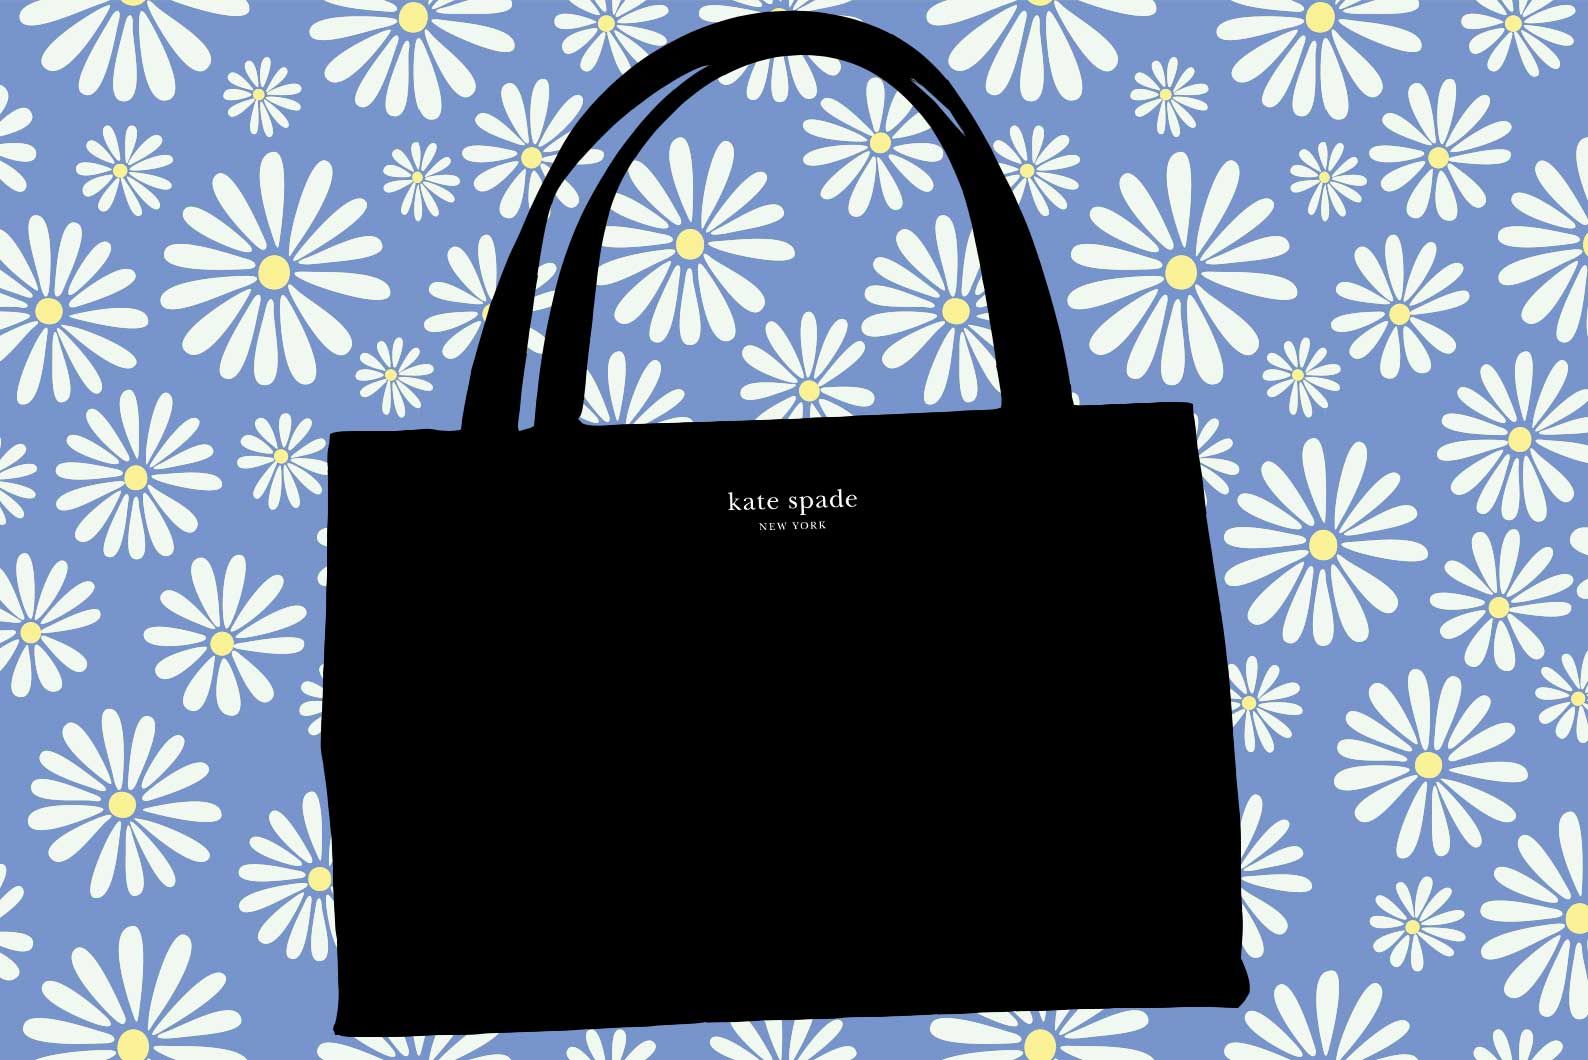 Growing Up With Kate Spade - Tablet Magazine